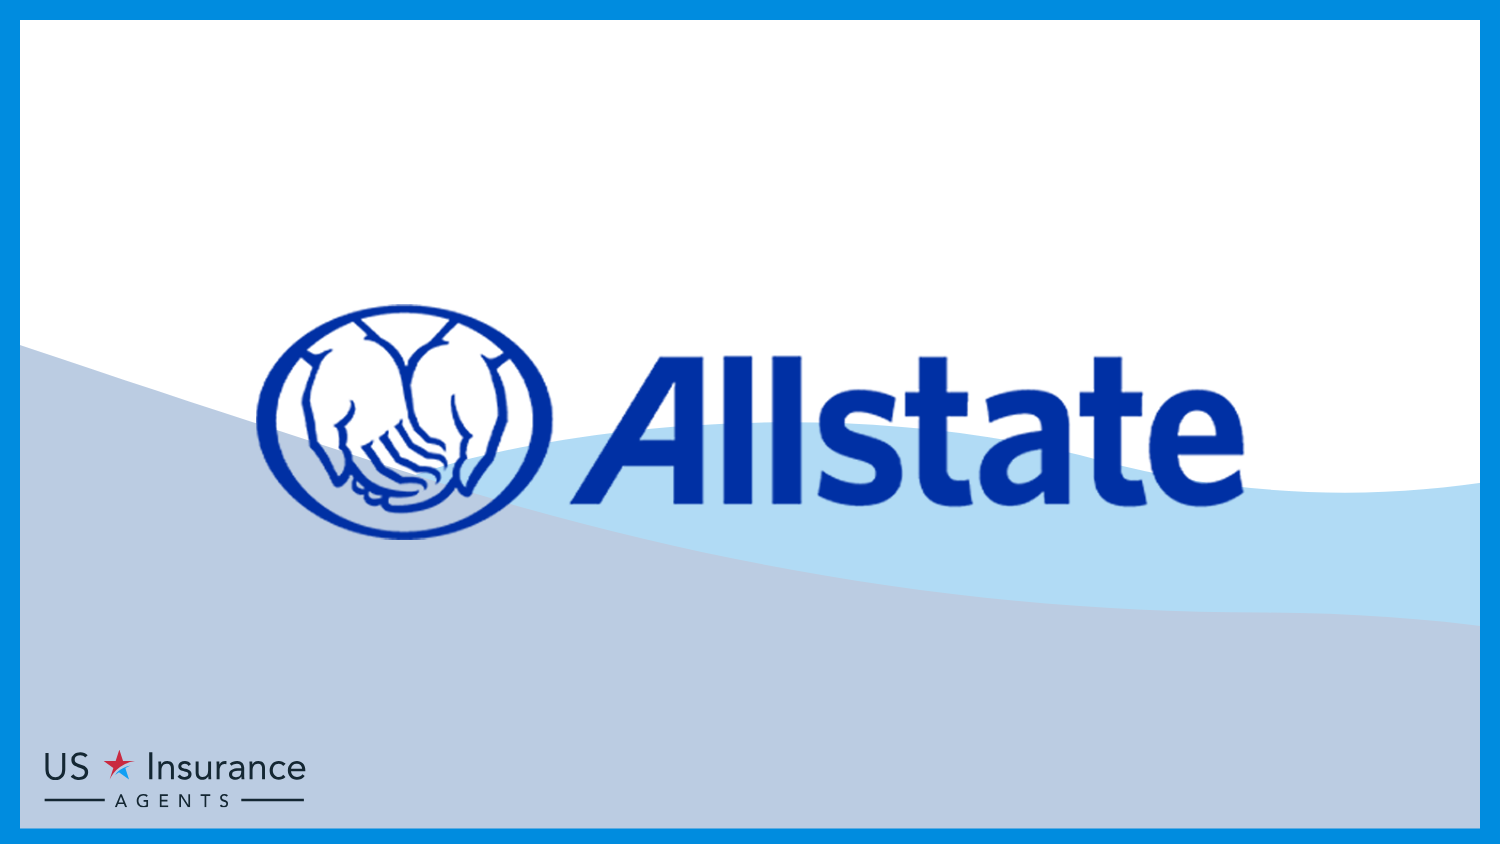 Allstate: Best Business Insurance for Musical Instrument Companies